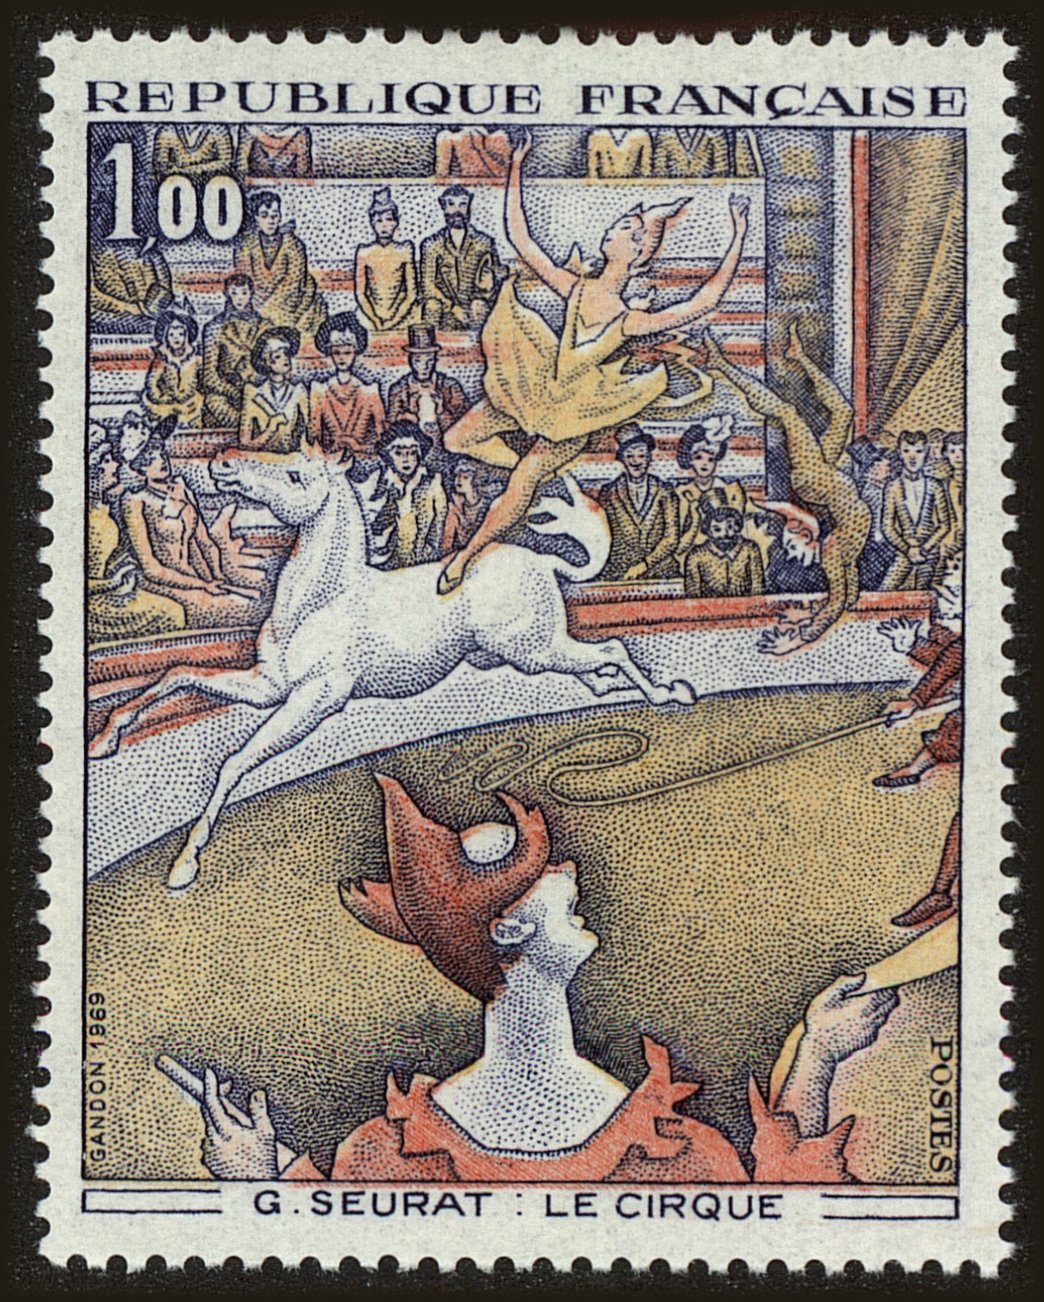 Front view of France 1239 collectors stamp